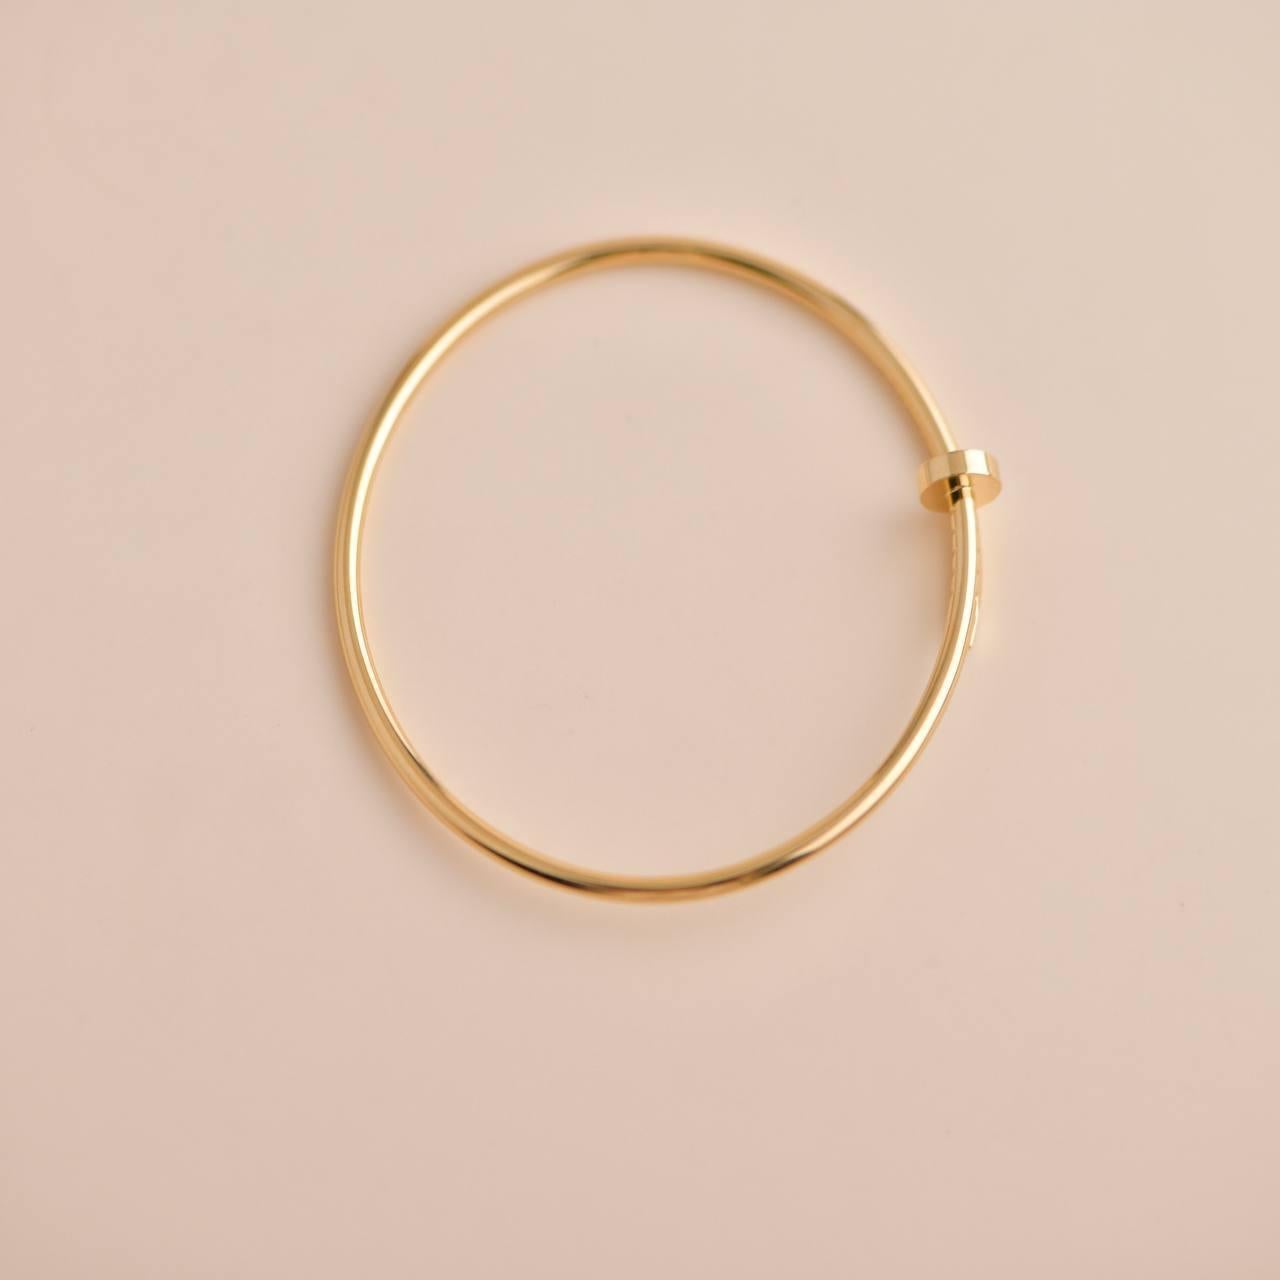 Cartier Juste un Clou Small Model Bracelet Yellow Gold Size 17 In Excellent Condition For Sale In Banbury, GB